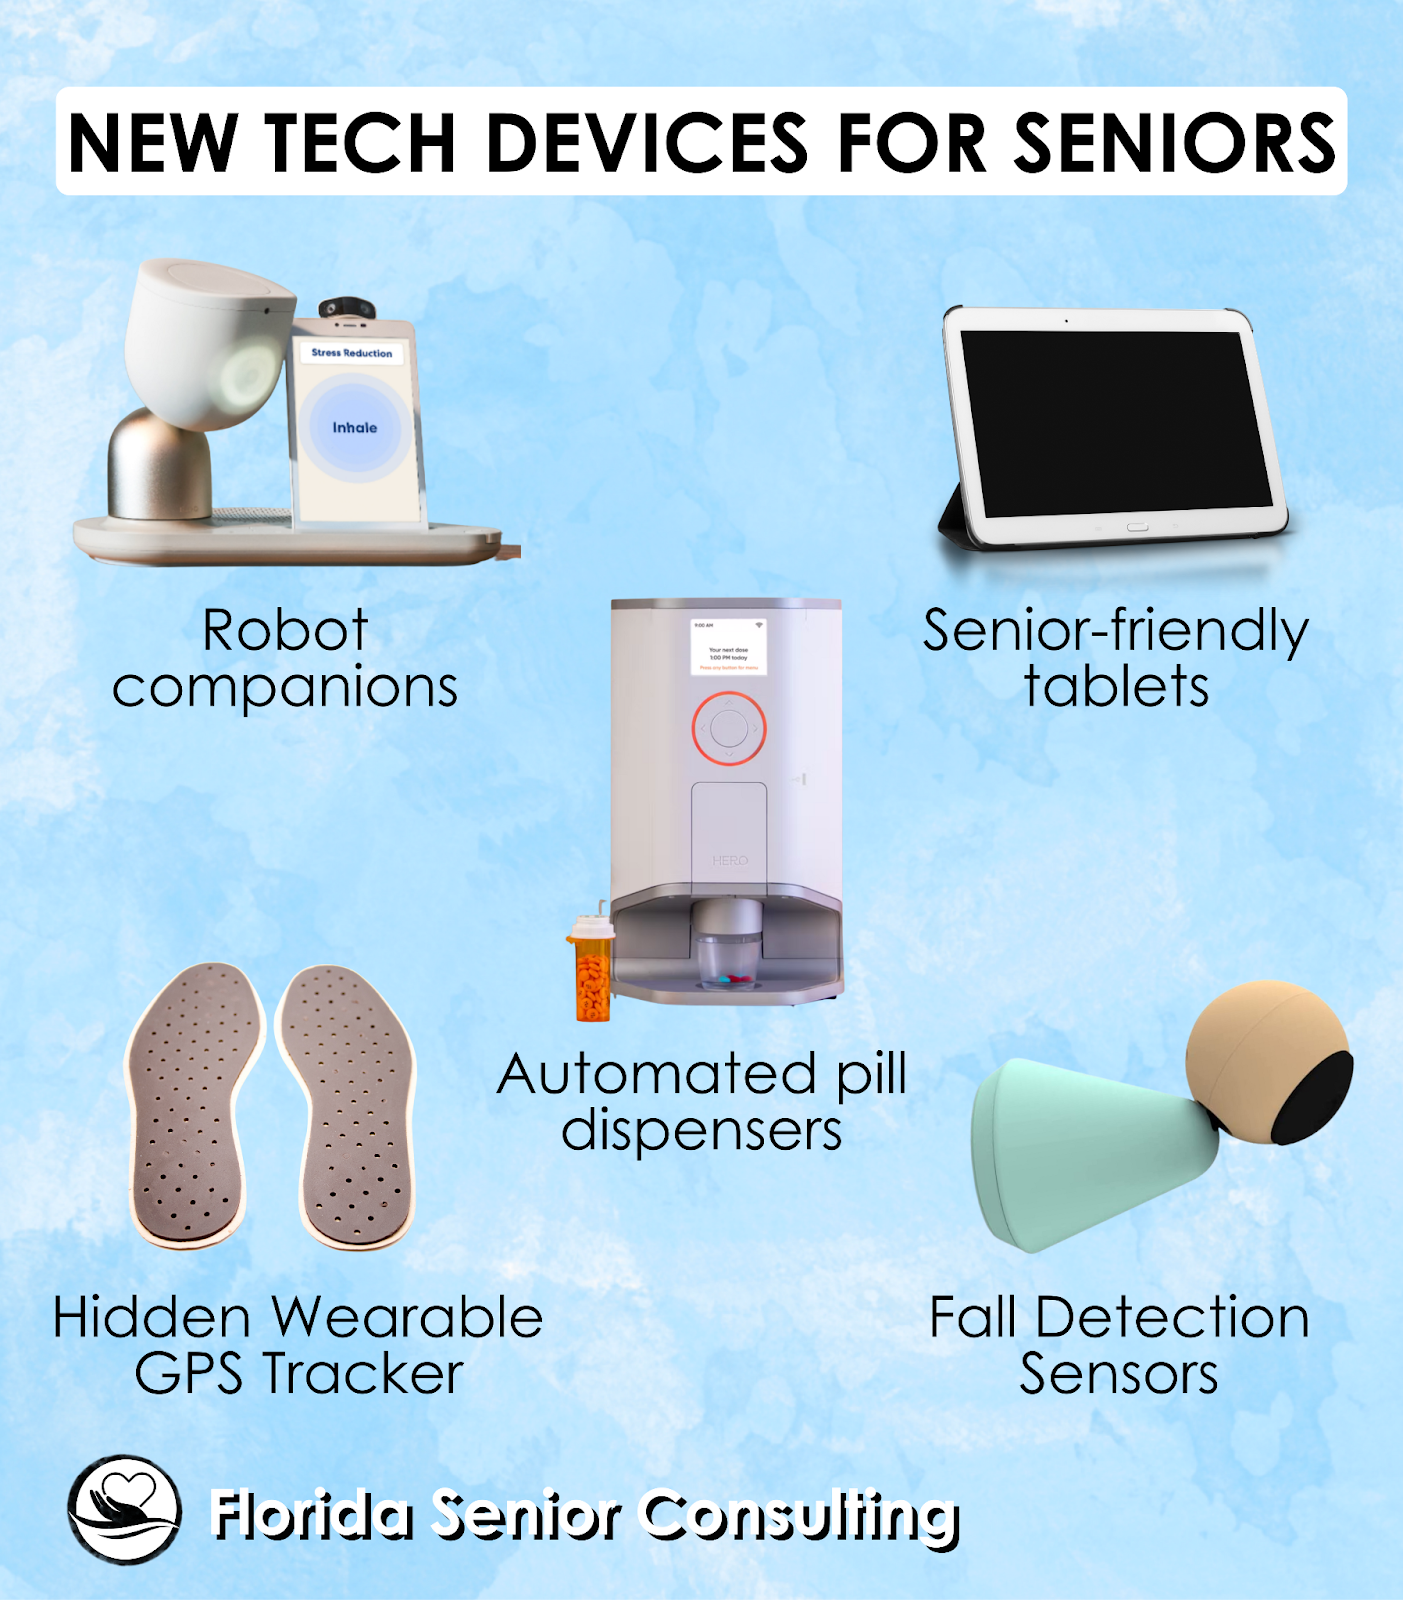 Gadgets for seniors who want to remain independent